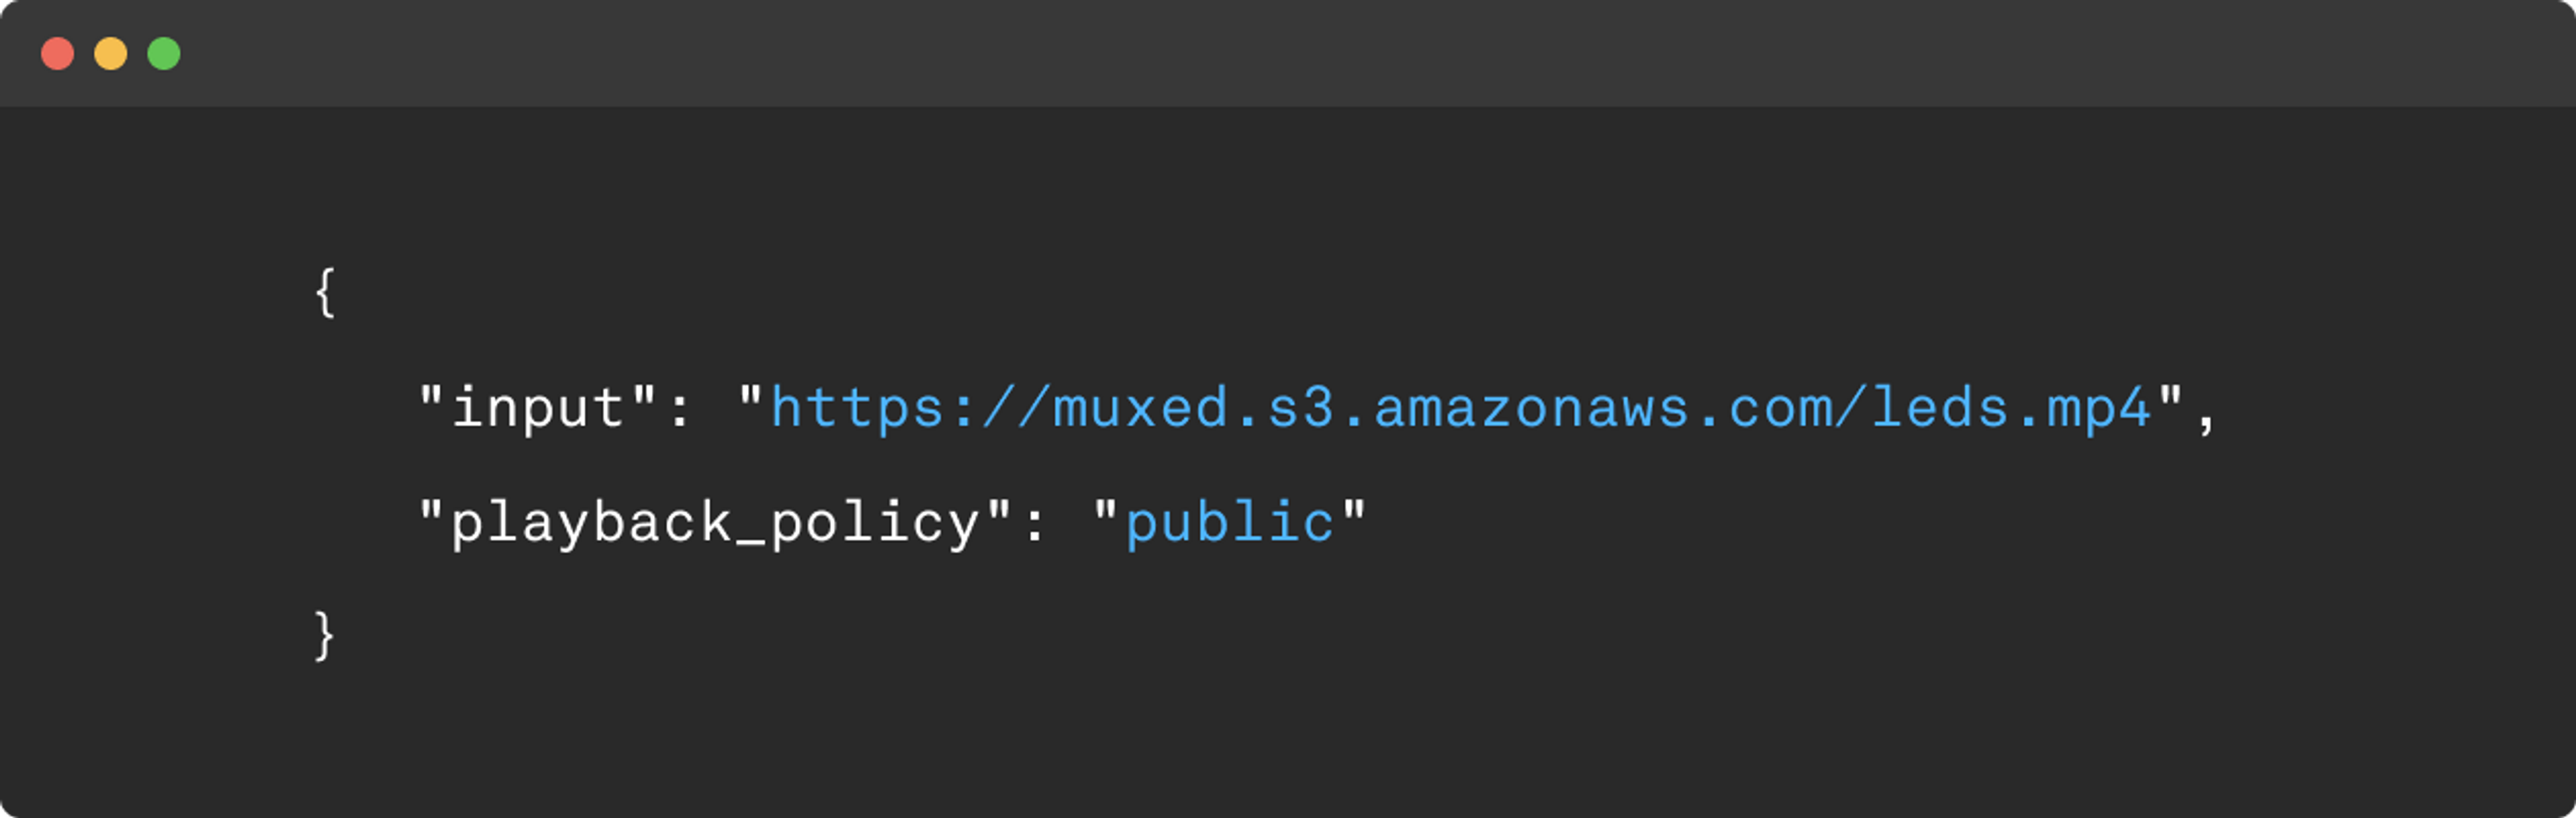 A code example showing an API call. Input, https://muxed.s3.amazonaws.com/leds.mp4. Playback policy, public.